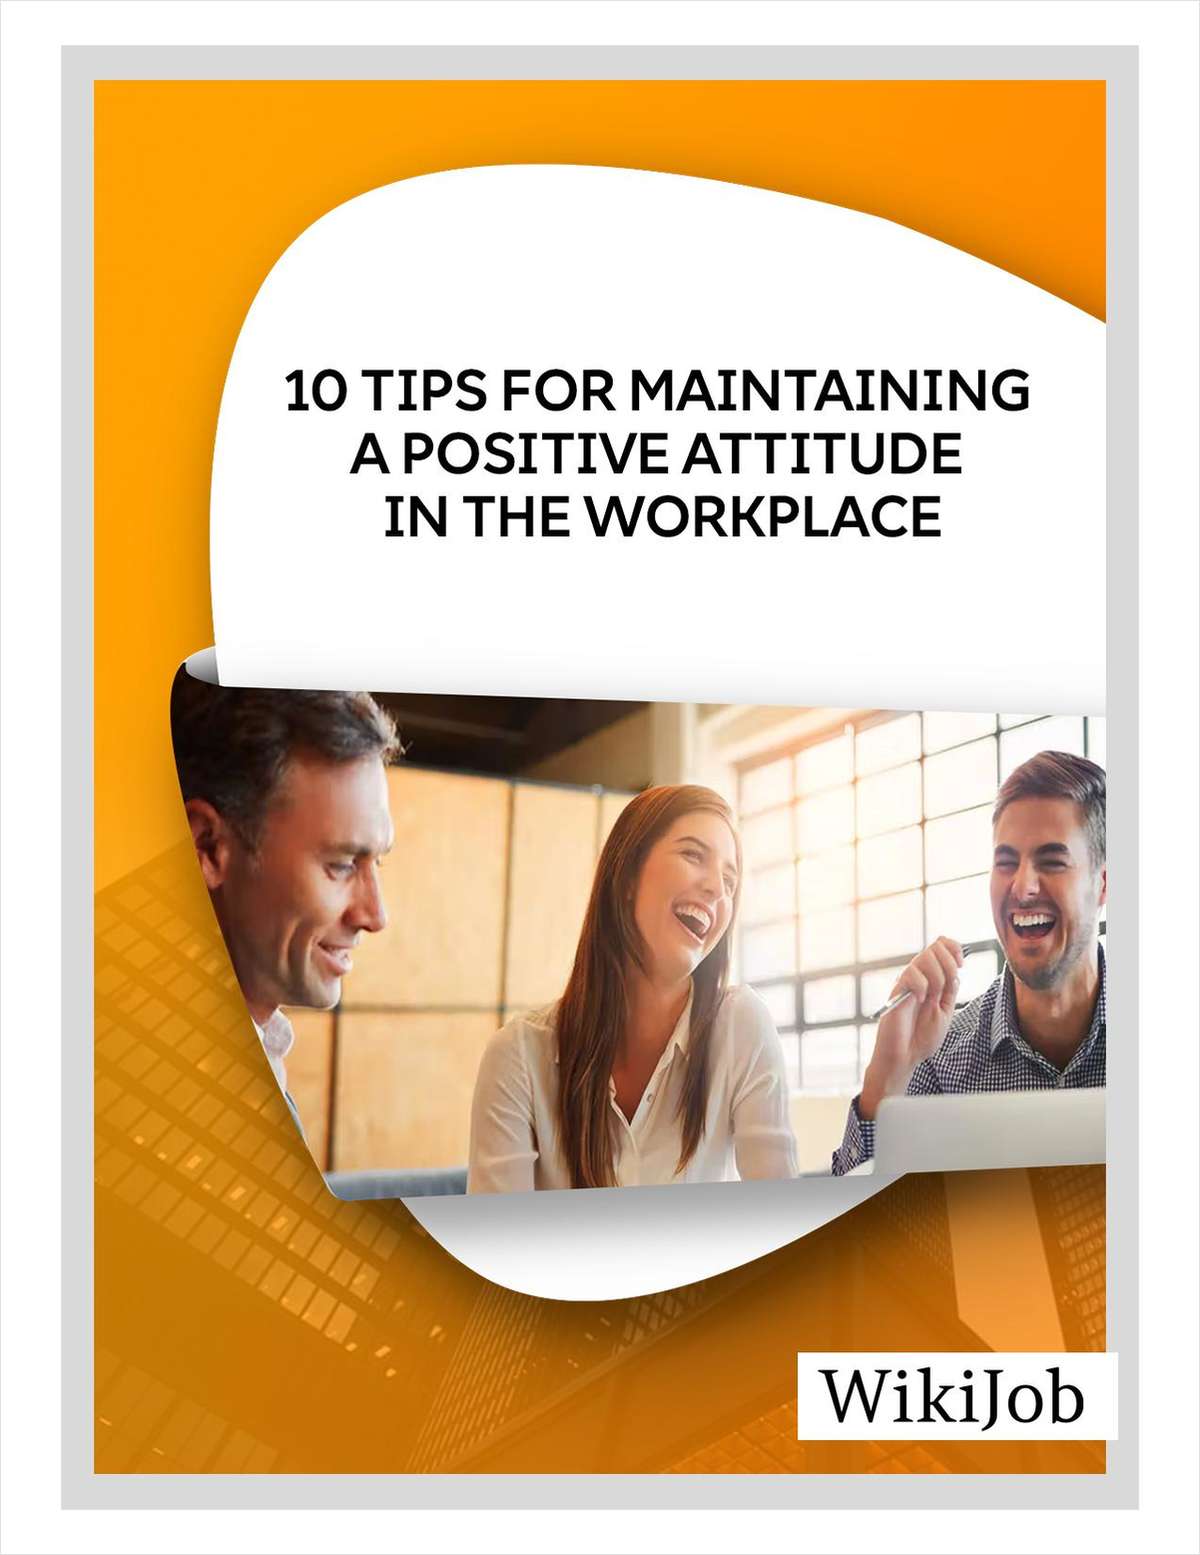 10 Tips for Maintaining a Positive Attitude in the Workplace